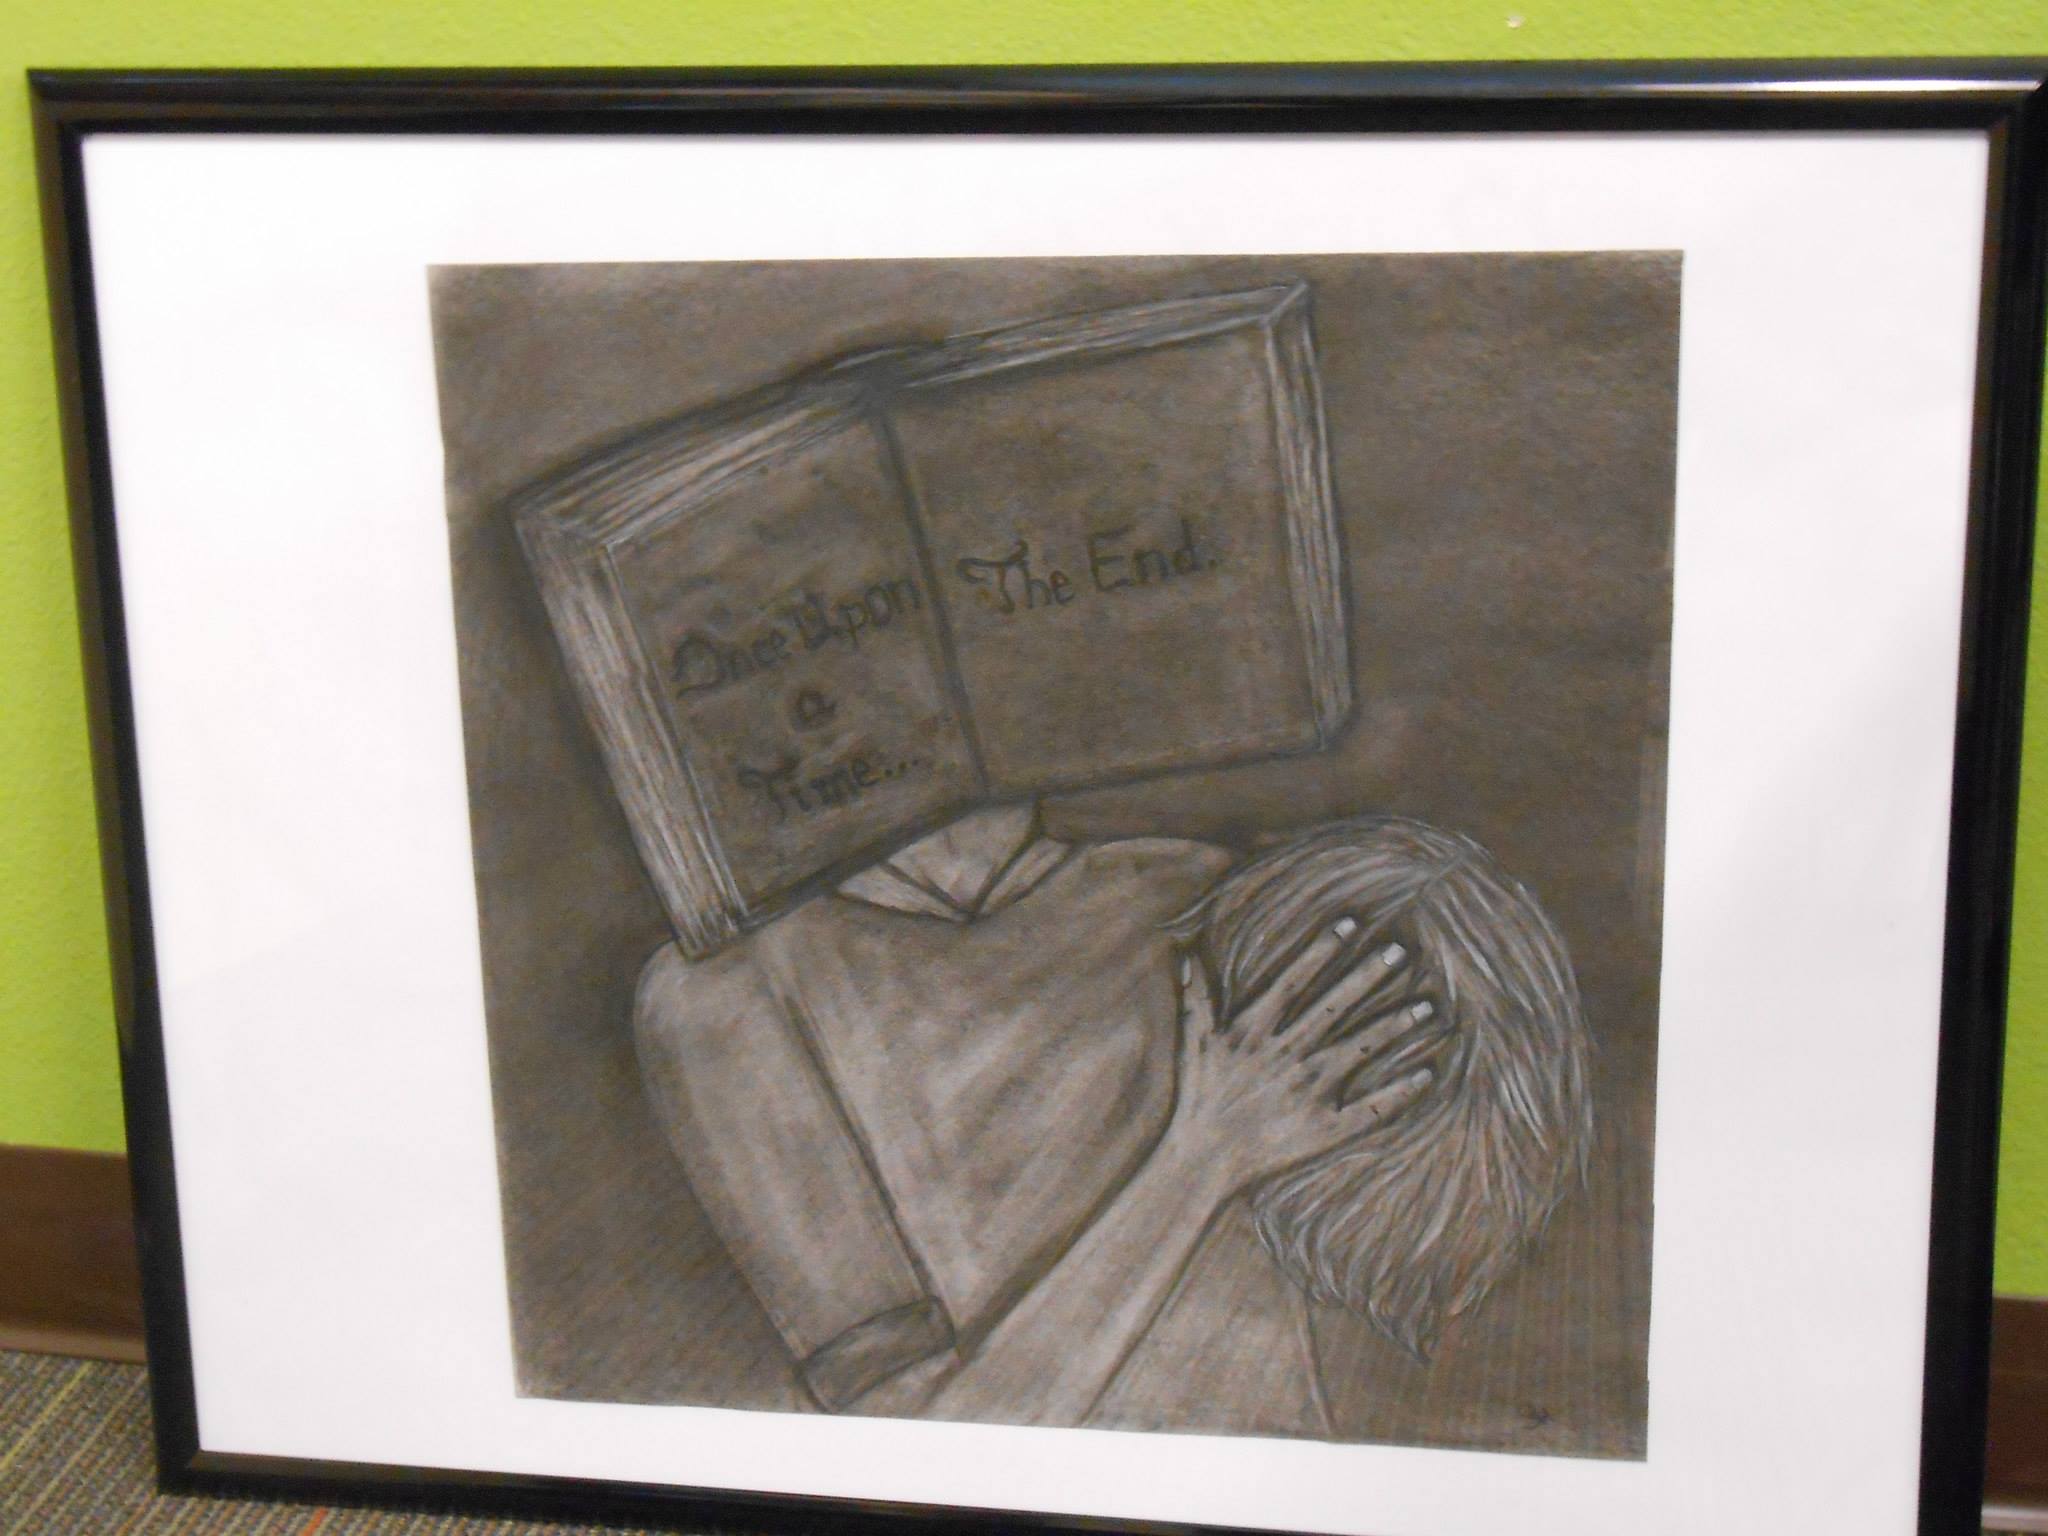 Samantha Haskell, "Lost My Head in a Book" 